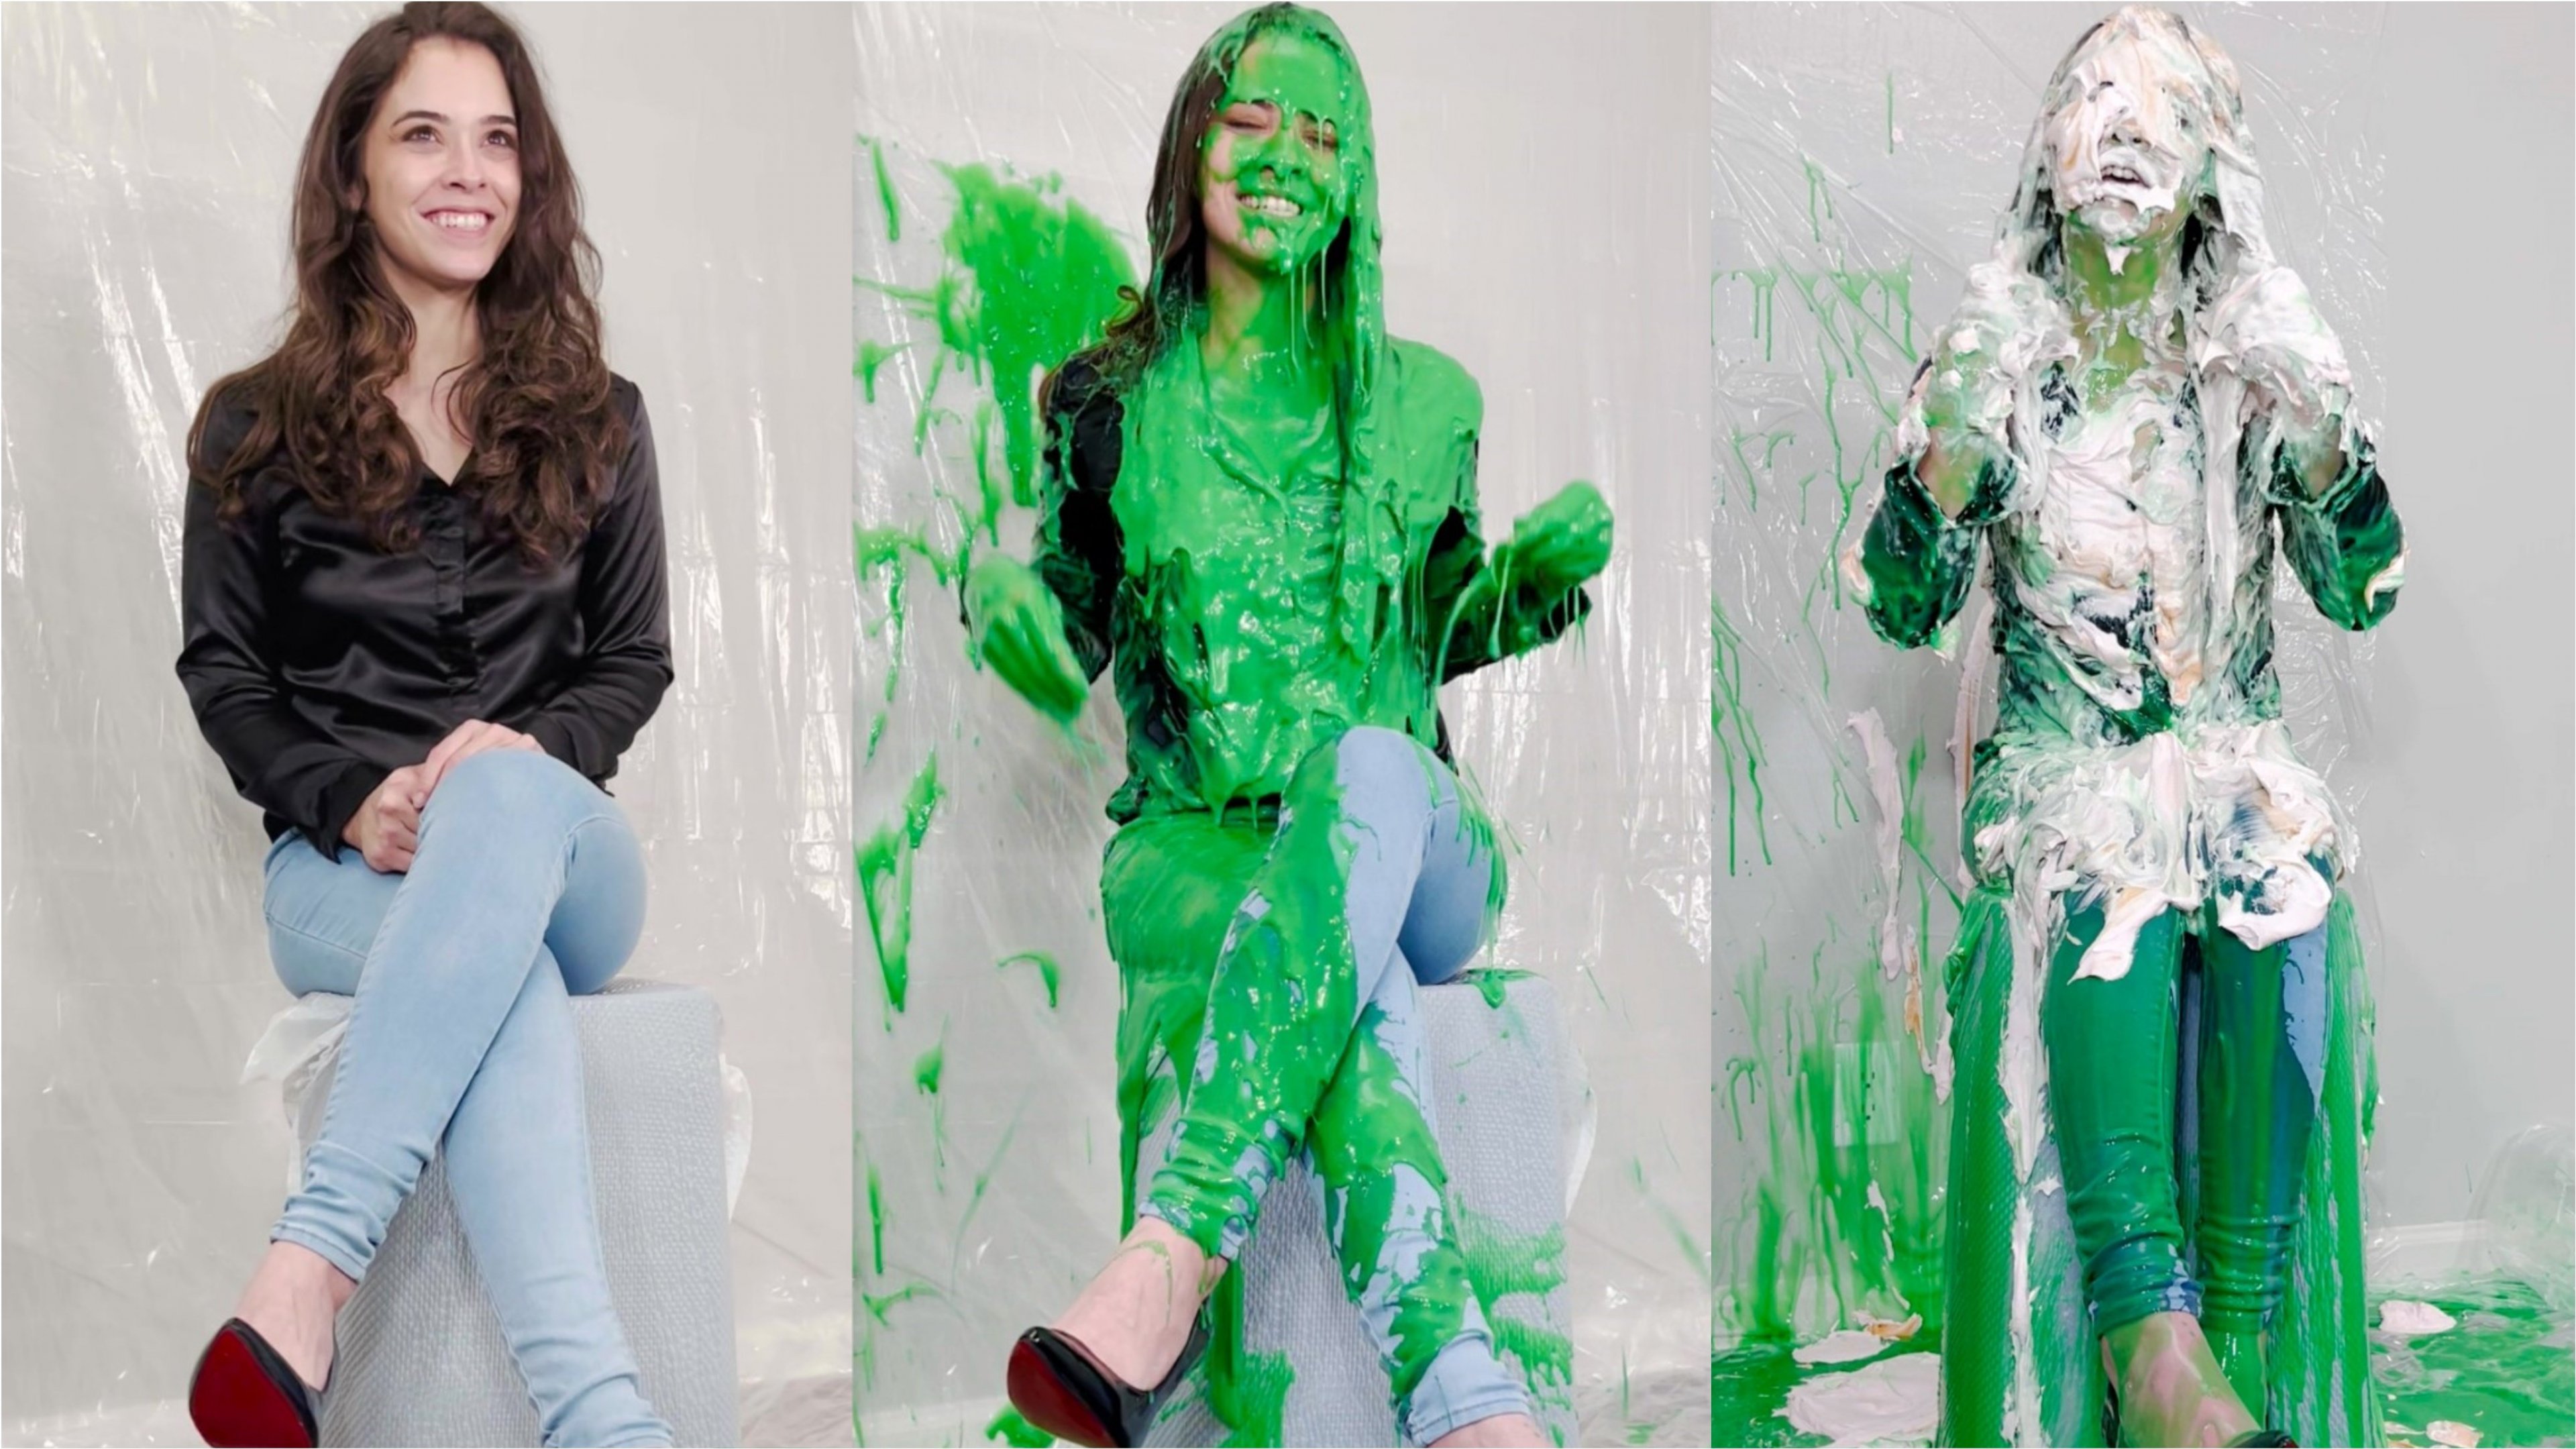 Meredith Blasted With Green Gunge, Fake Cum and Pies: - UMD